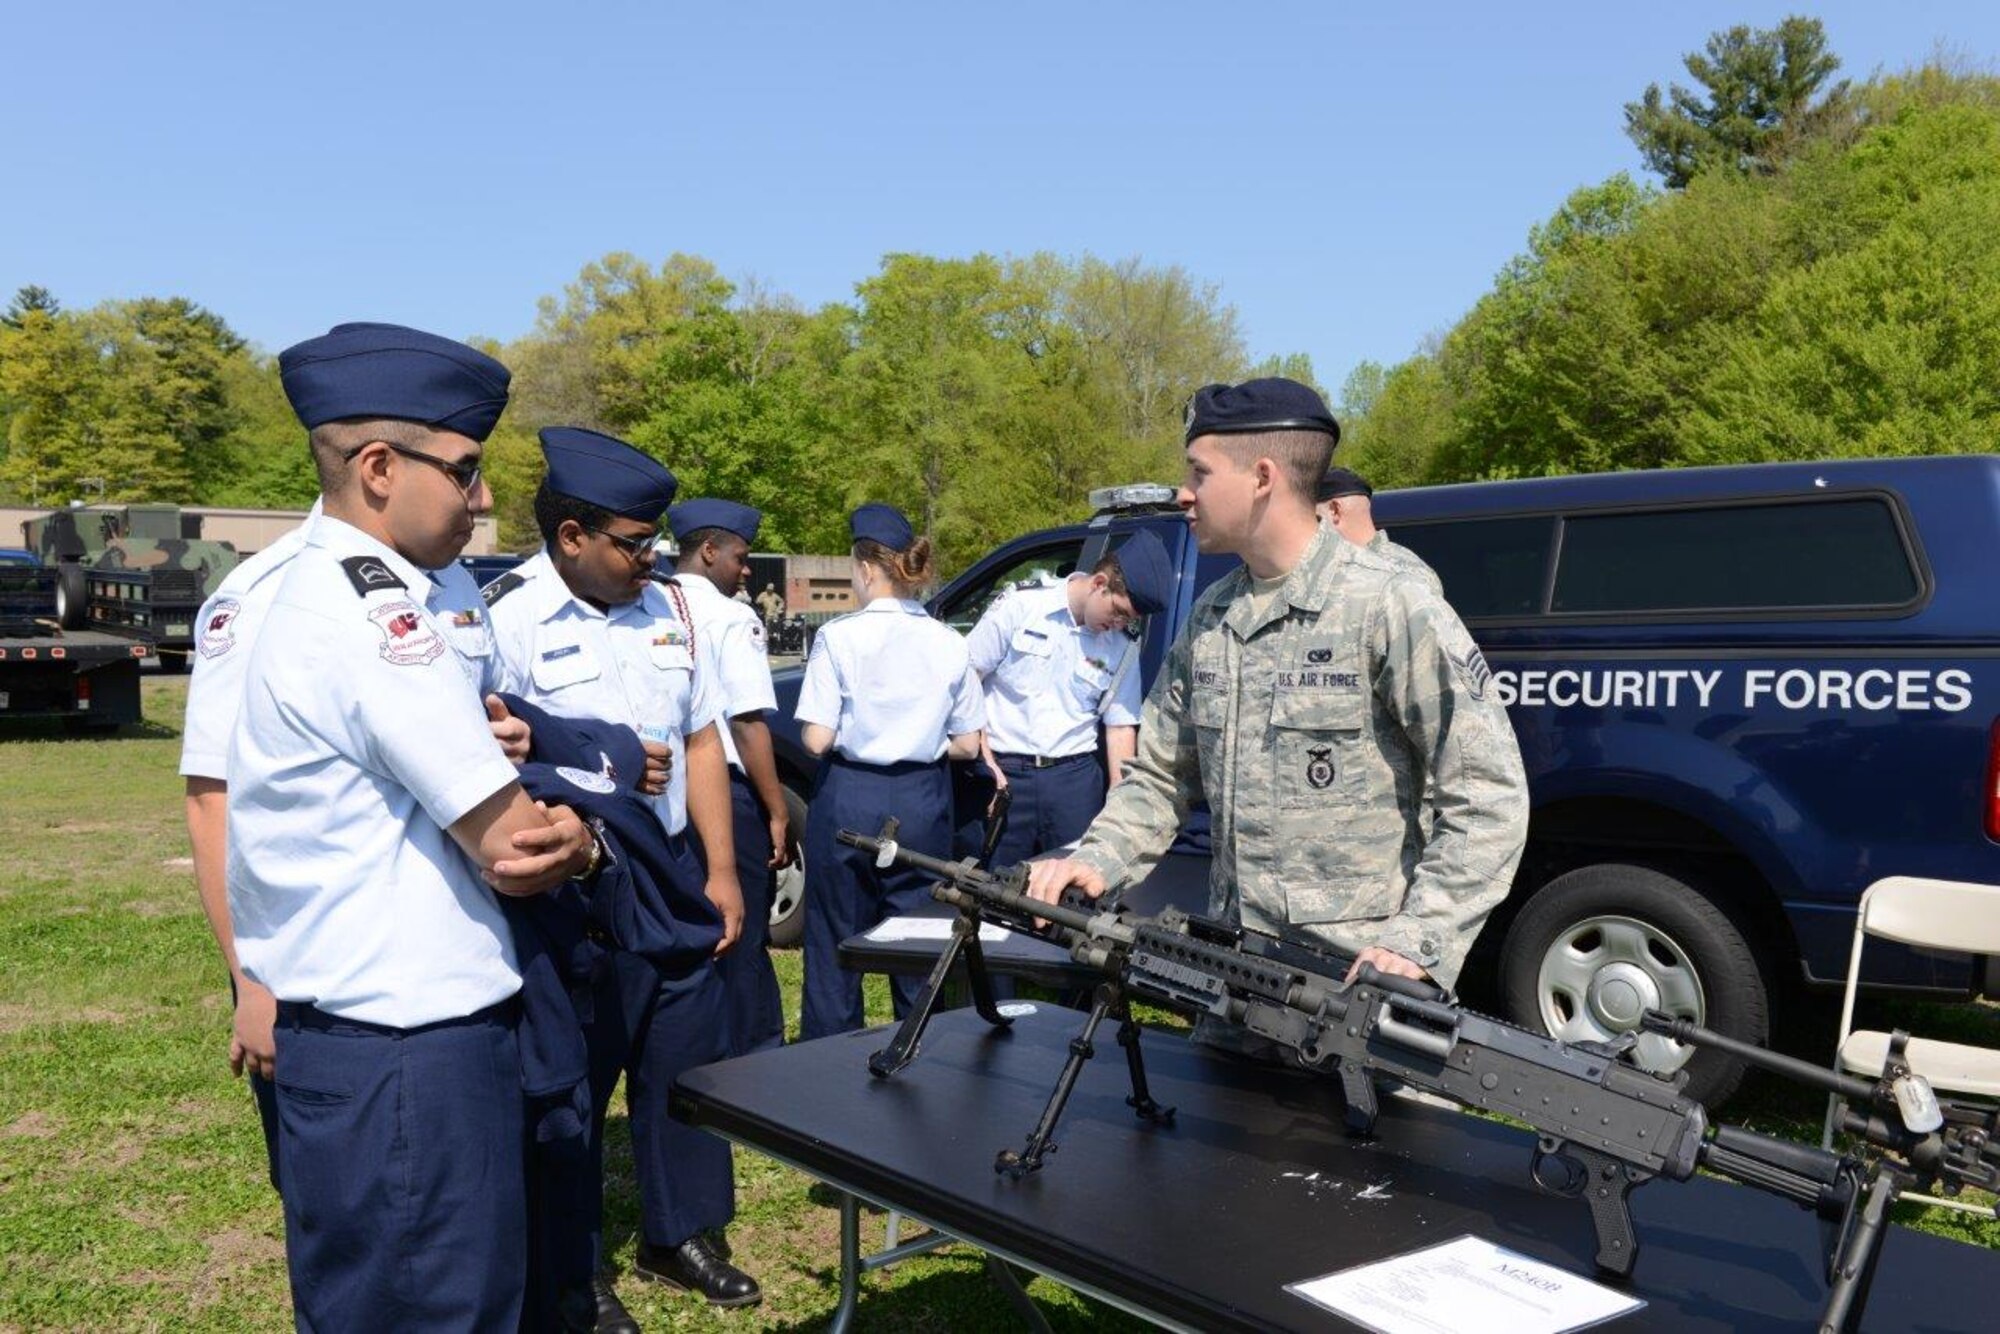 Staff Sgt. Andrew Faust, security forces specialist, explains safe use and handling of military-issued weapons to visiting Jr. R.O.T.C. students May 12, 2016, during a Career Day event hosted at Bradley Air National Guard Base, East Granby, Conn. The interaction with troops from the 103rd Security Forces Squadron was a highlight for students participating in Career Day events. (U.S. Air Force photo by Master Sgt. Erin McNamara)